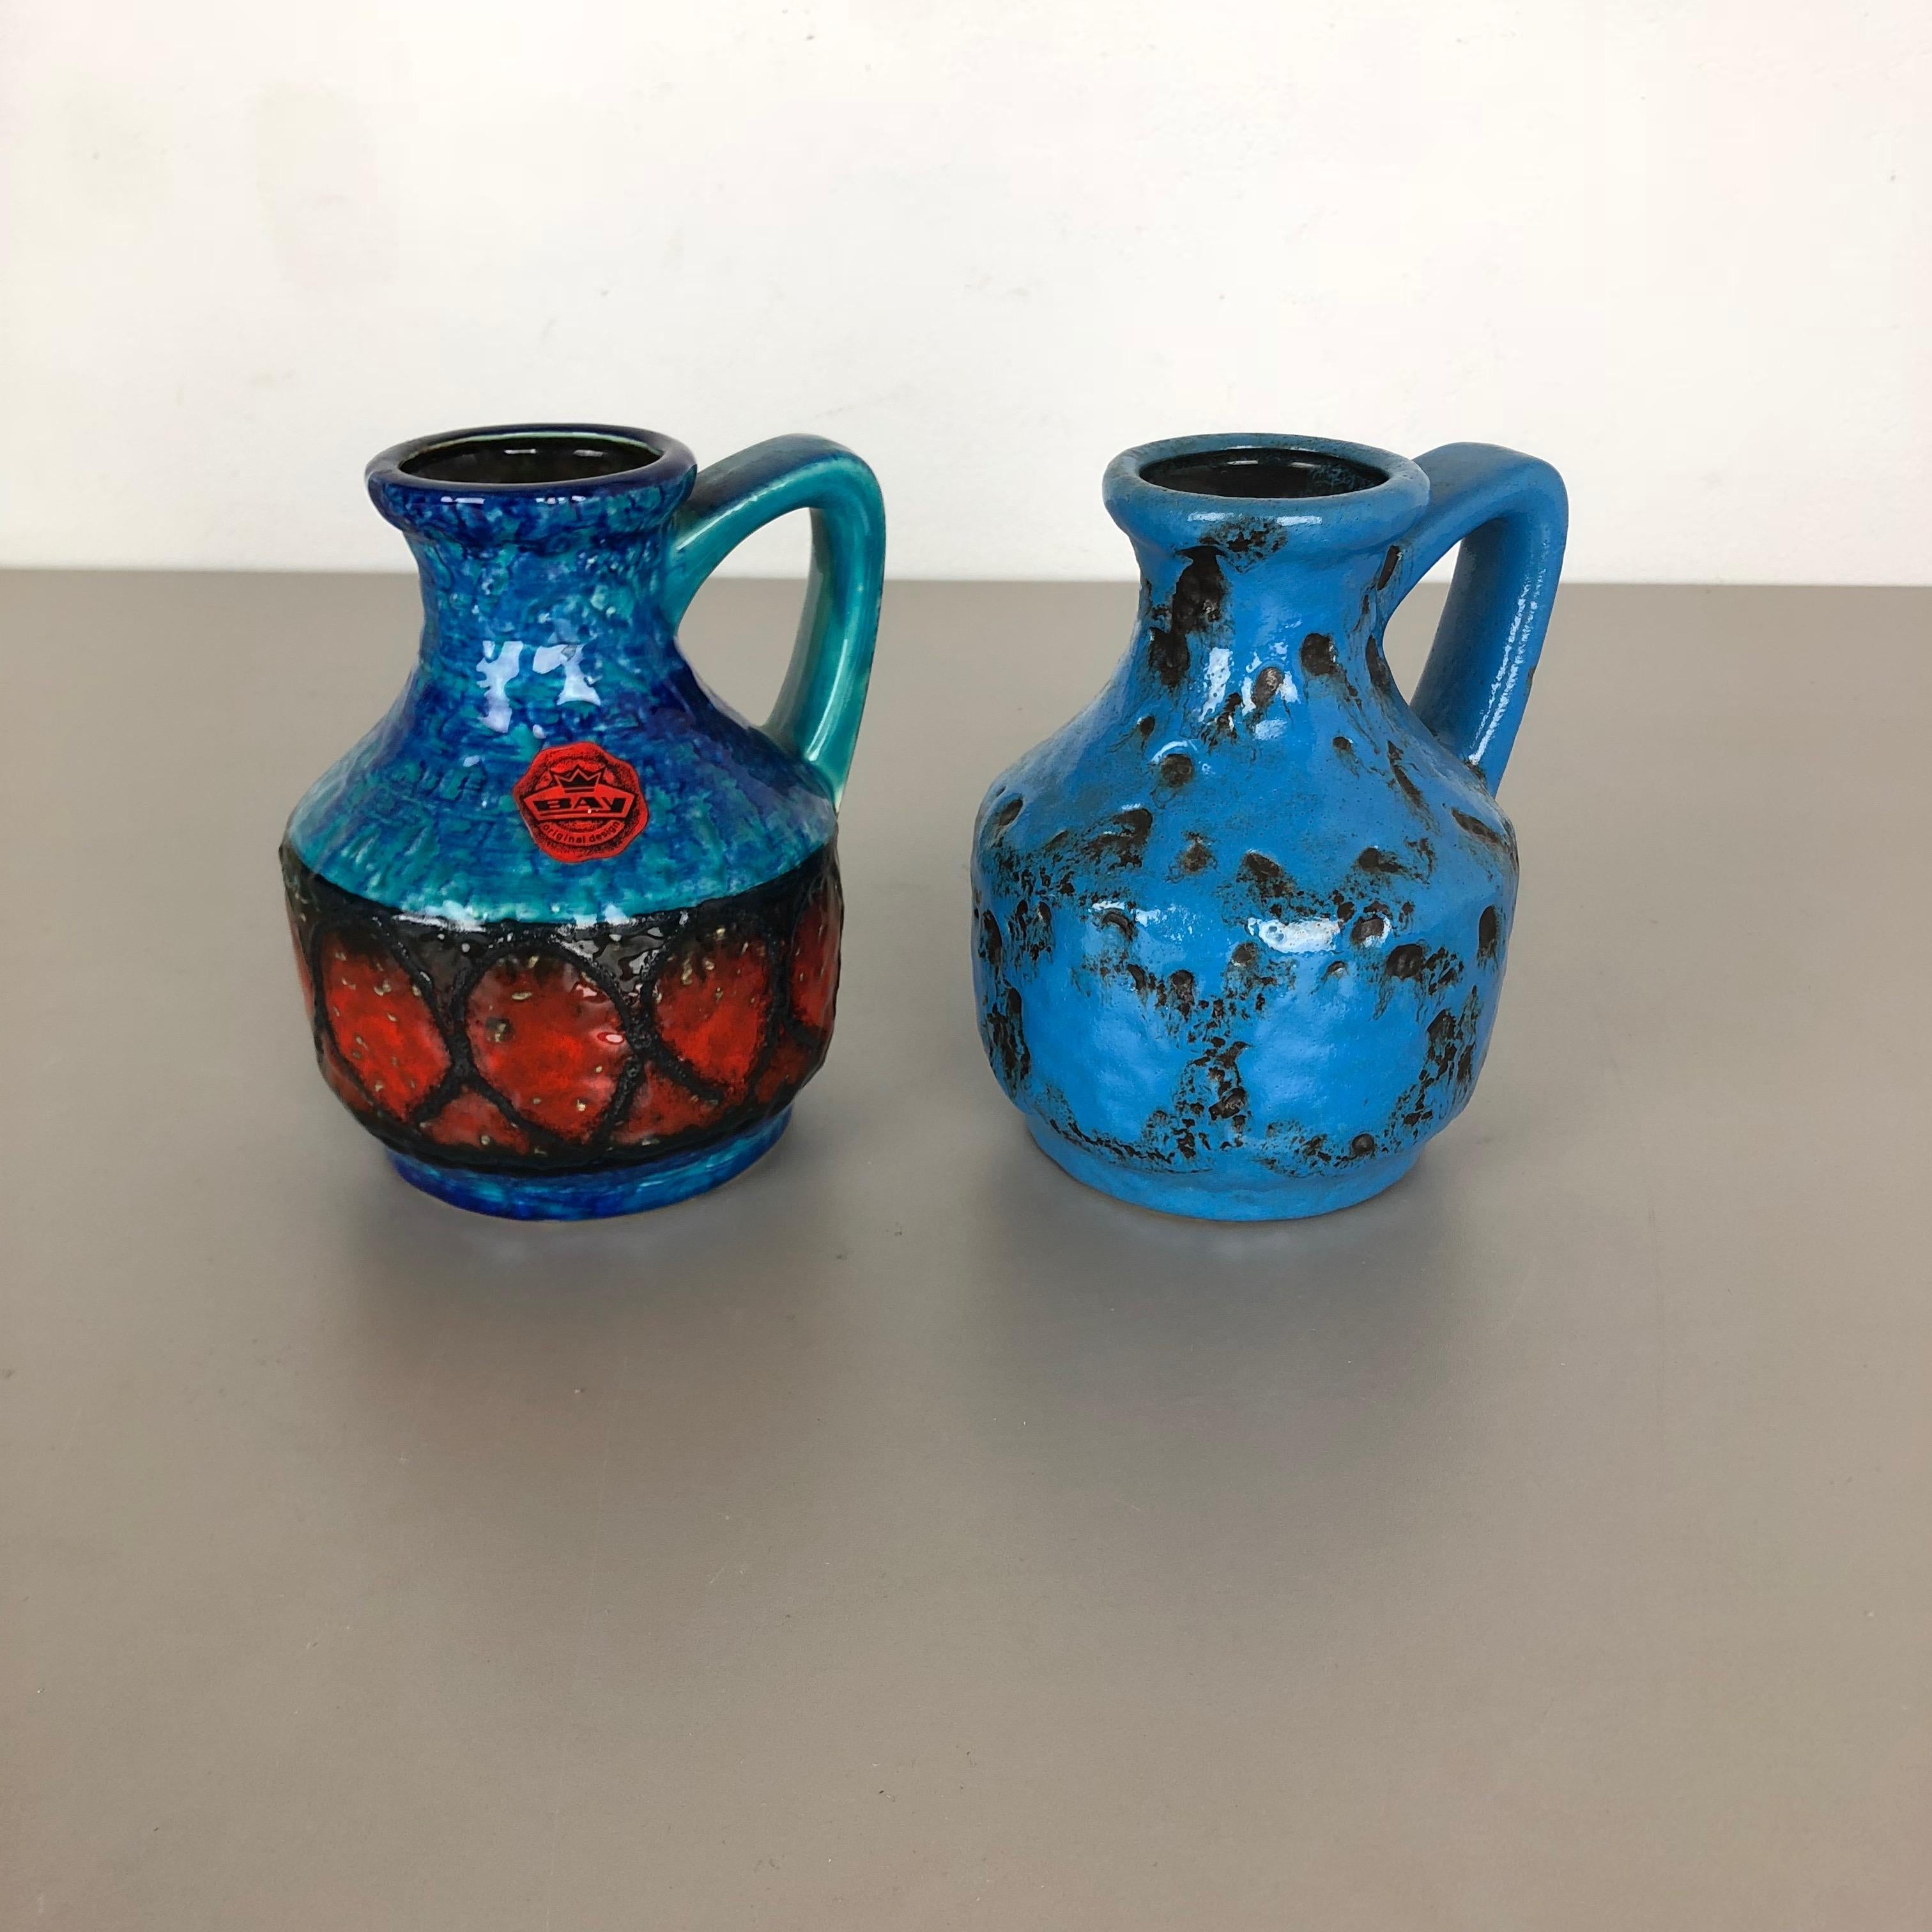 Article:

Pottery ceramic vase set of 2


Producer:

BAY Ceramic, Germany


Decade:

1960s



Description:

Set of 2 original vintage 1960s pottery ceramic vase made in Germany. High quality German production with a nice abstract